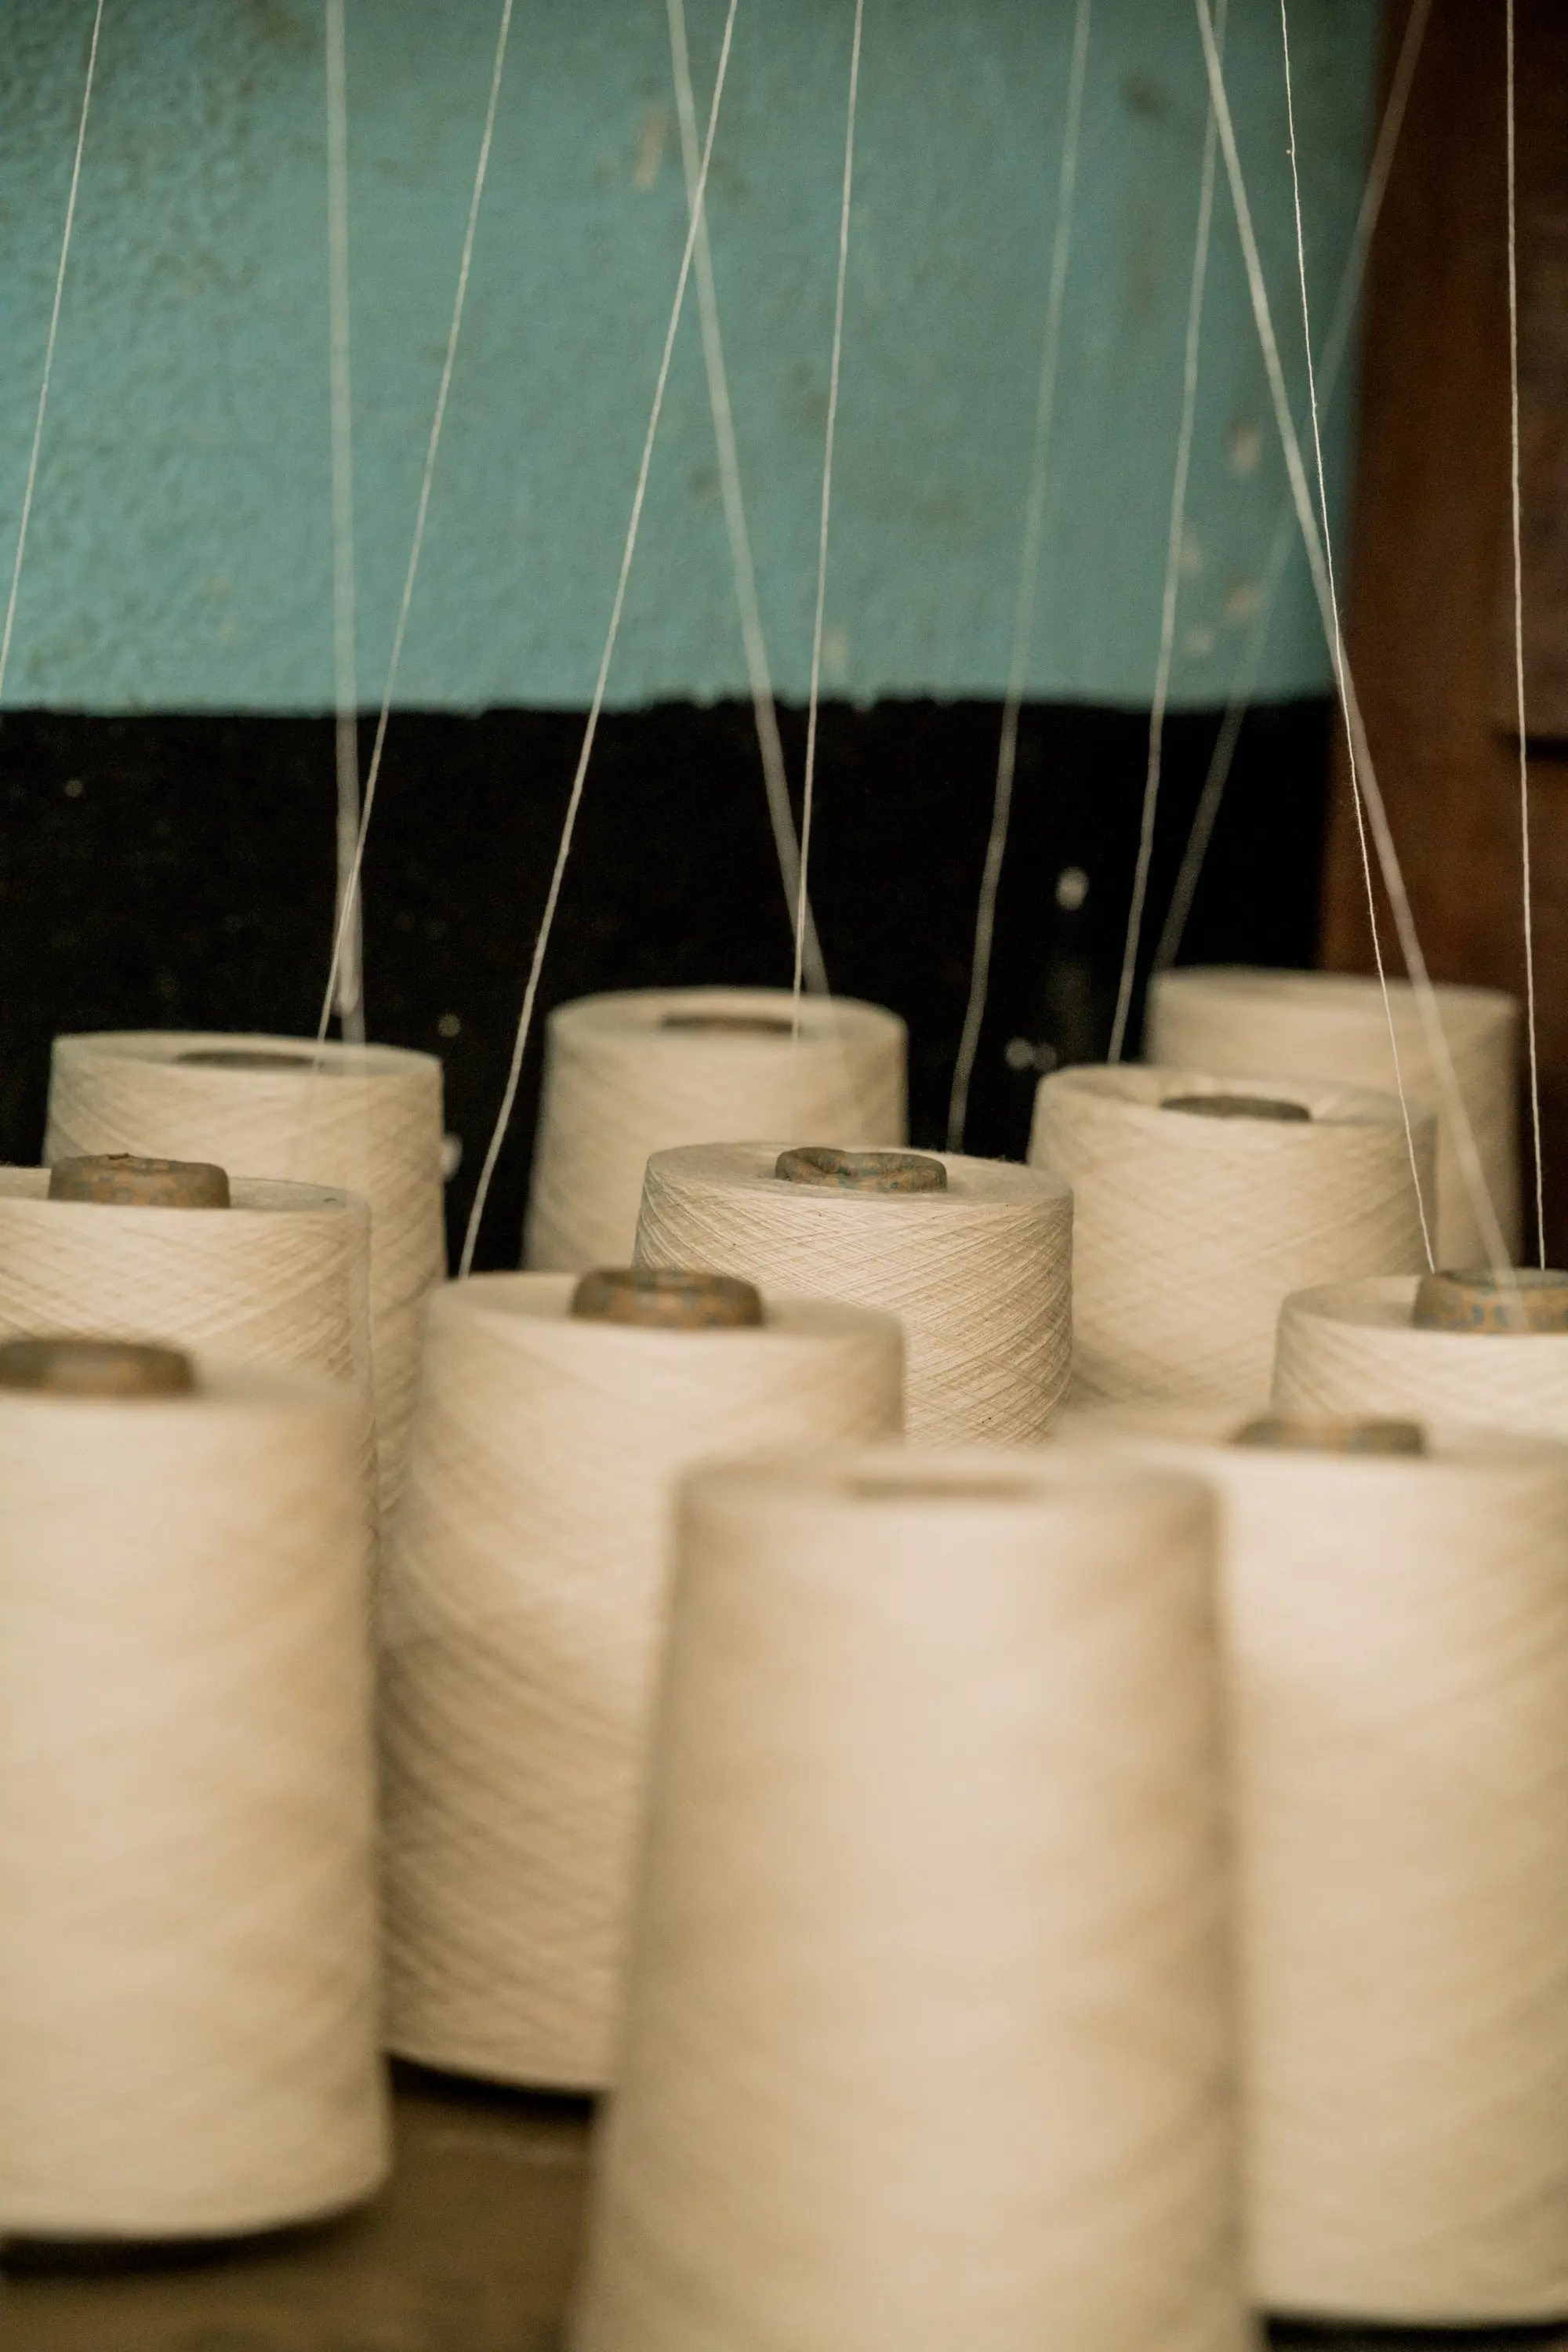 Photograph of multiple spools of thread.